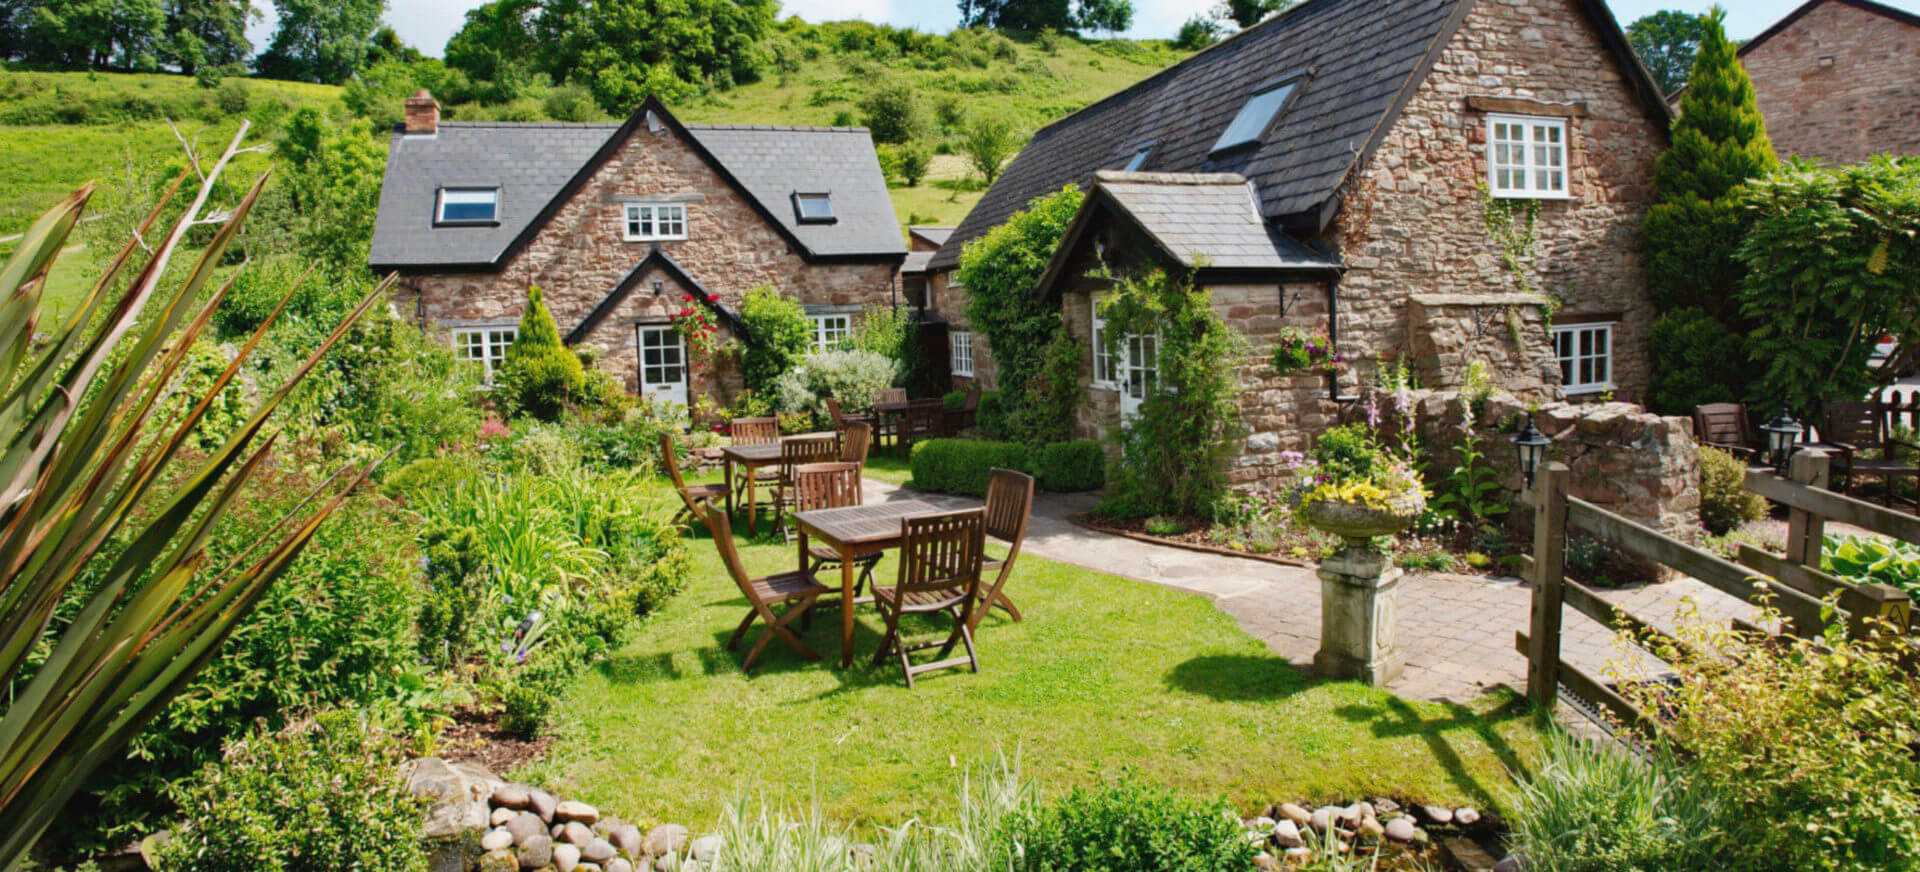 Kaya reviews a stunning boutique Hotel in the heart of the Forest of Dean  - The Tudor Farmhouse